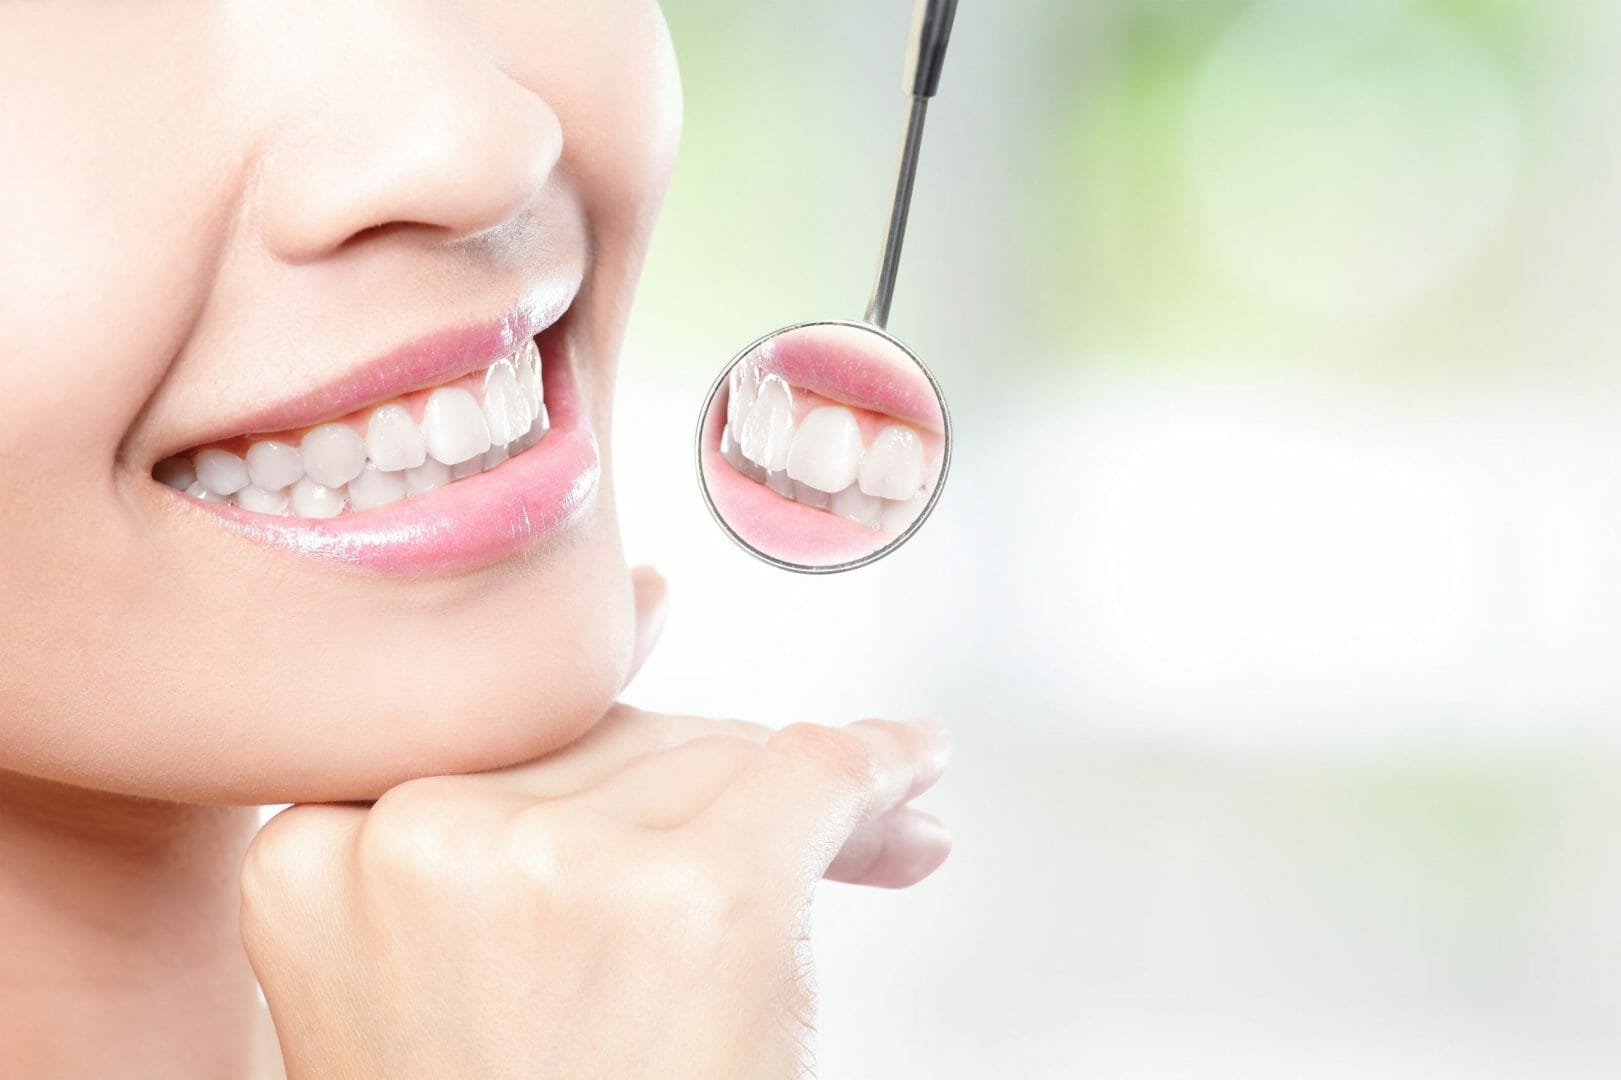 Selecting the Right Mississauga Dentist to Help Maintain Healthy Teeth